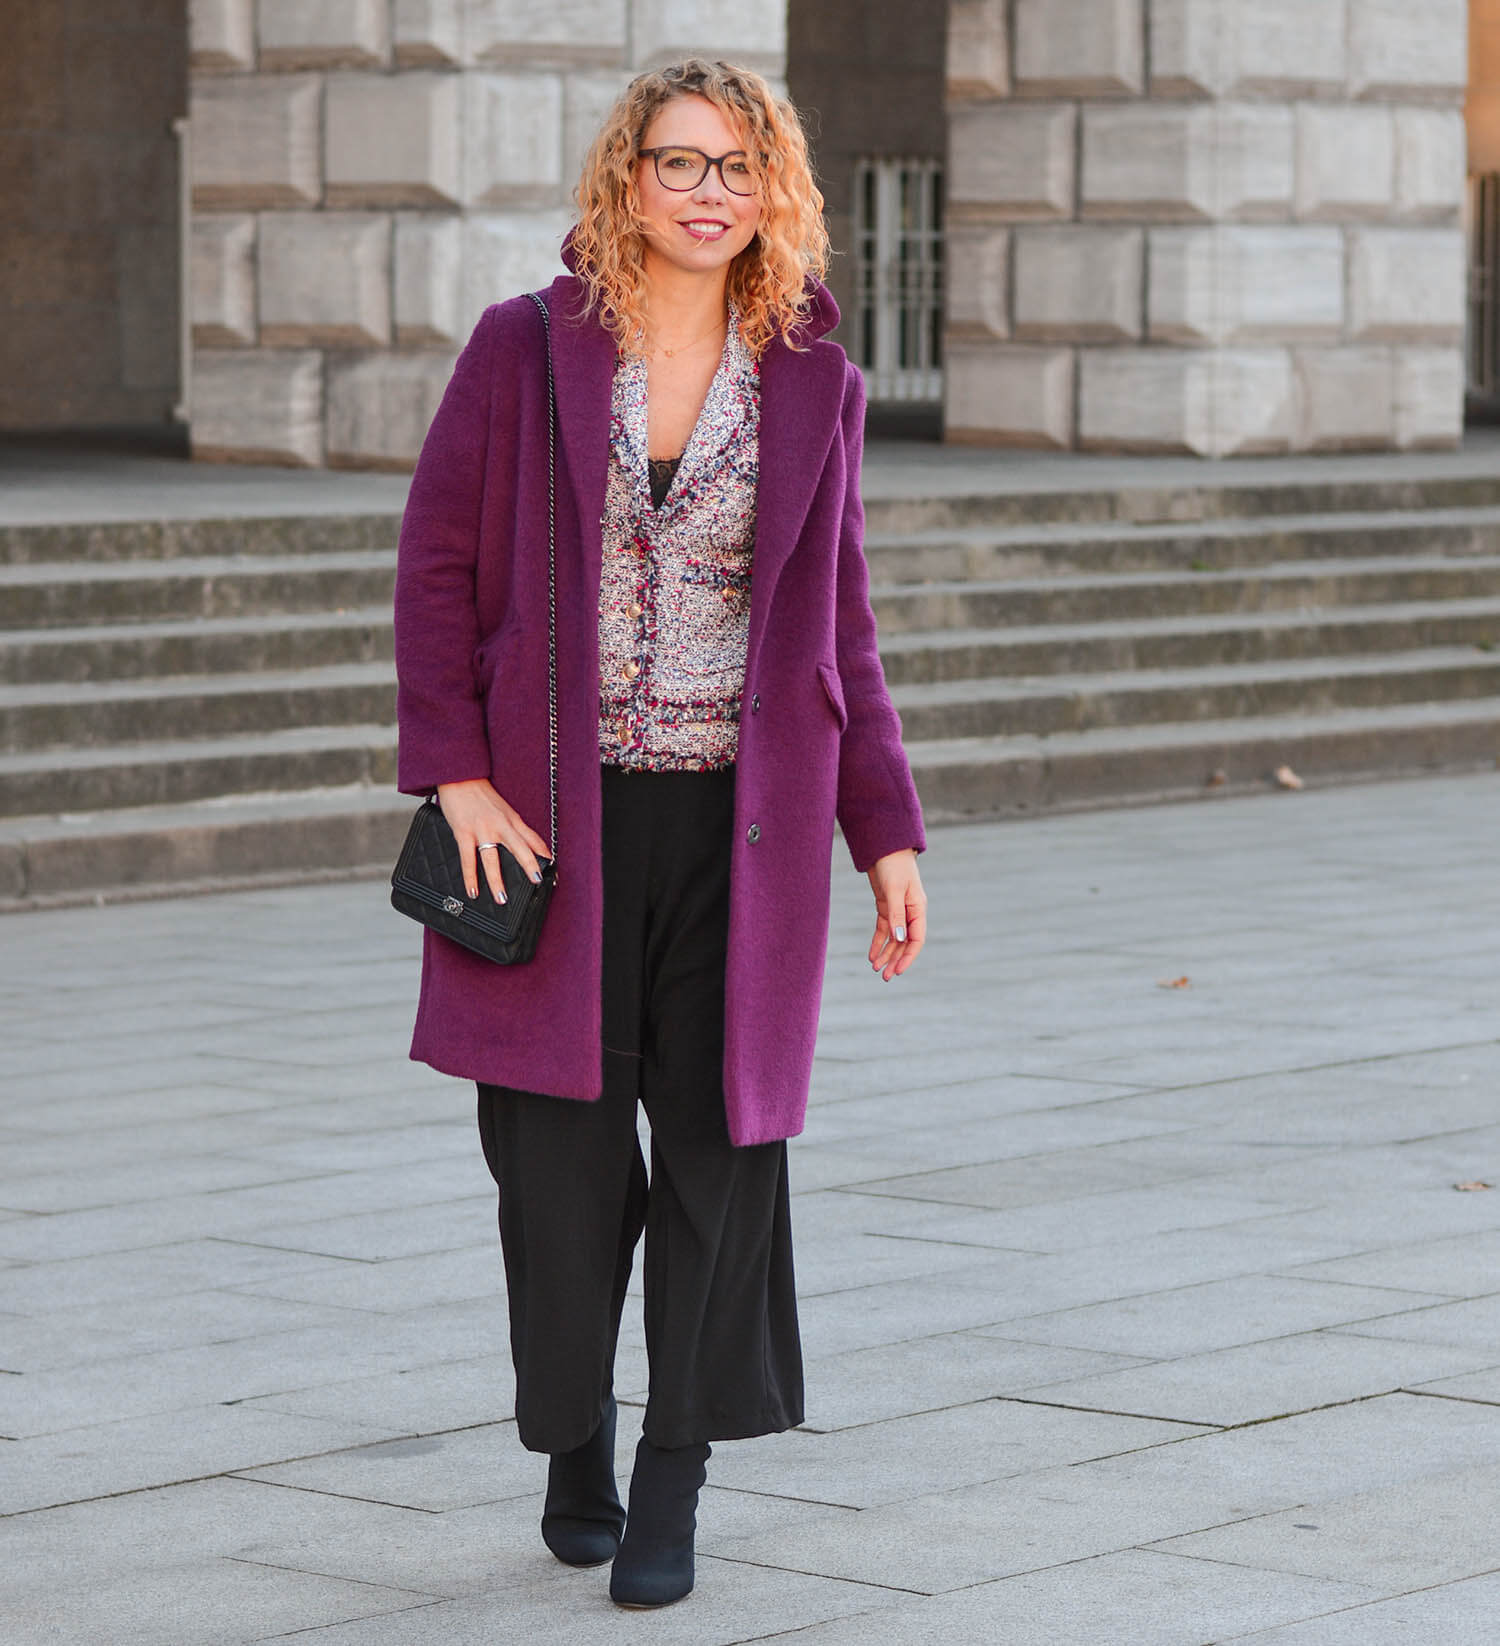 culottes-in-winter-purple-wool-coat-tweed-jacket-sock-boots-kationette-fashionblogger